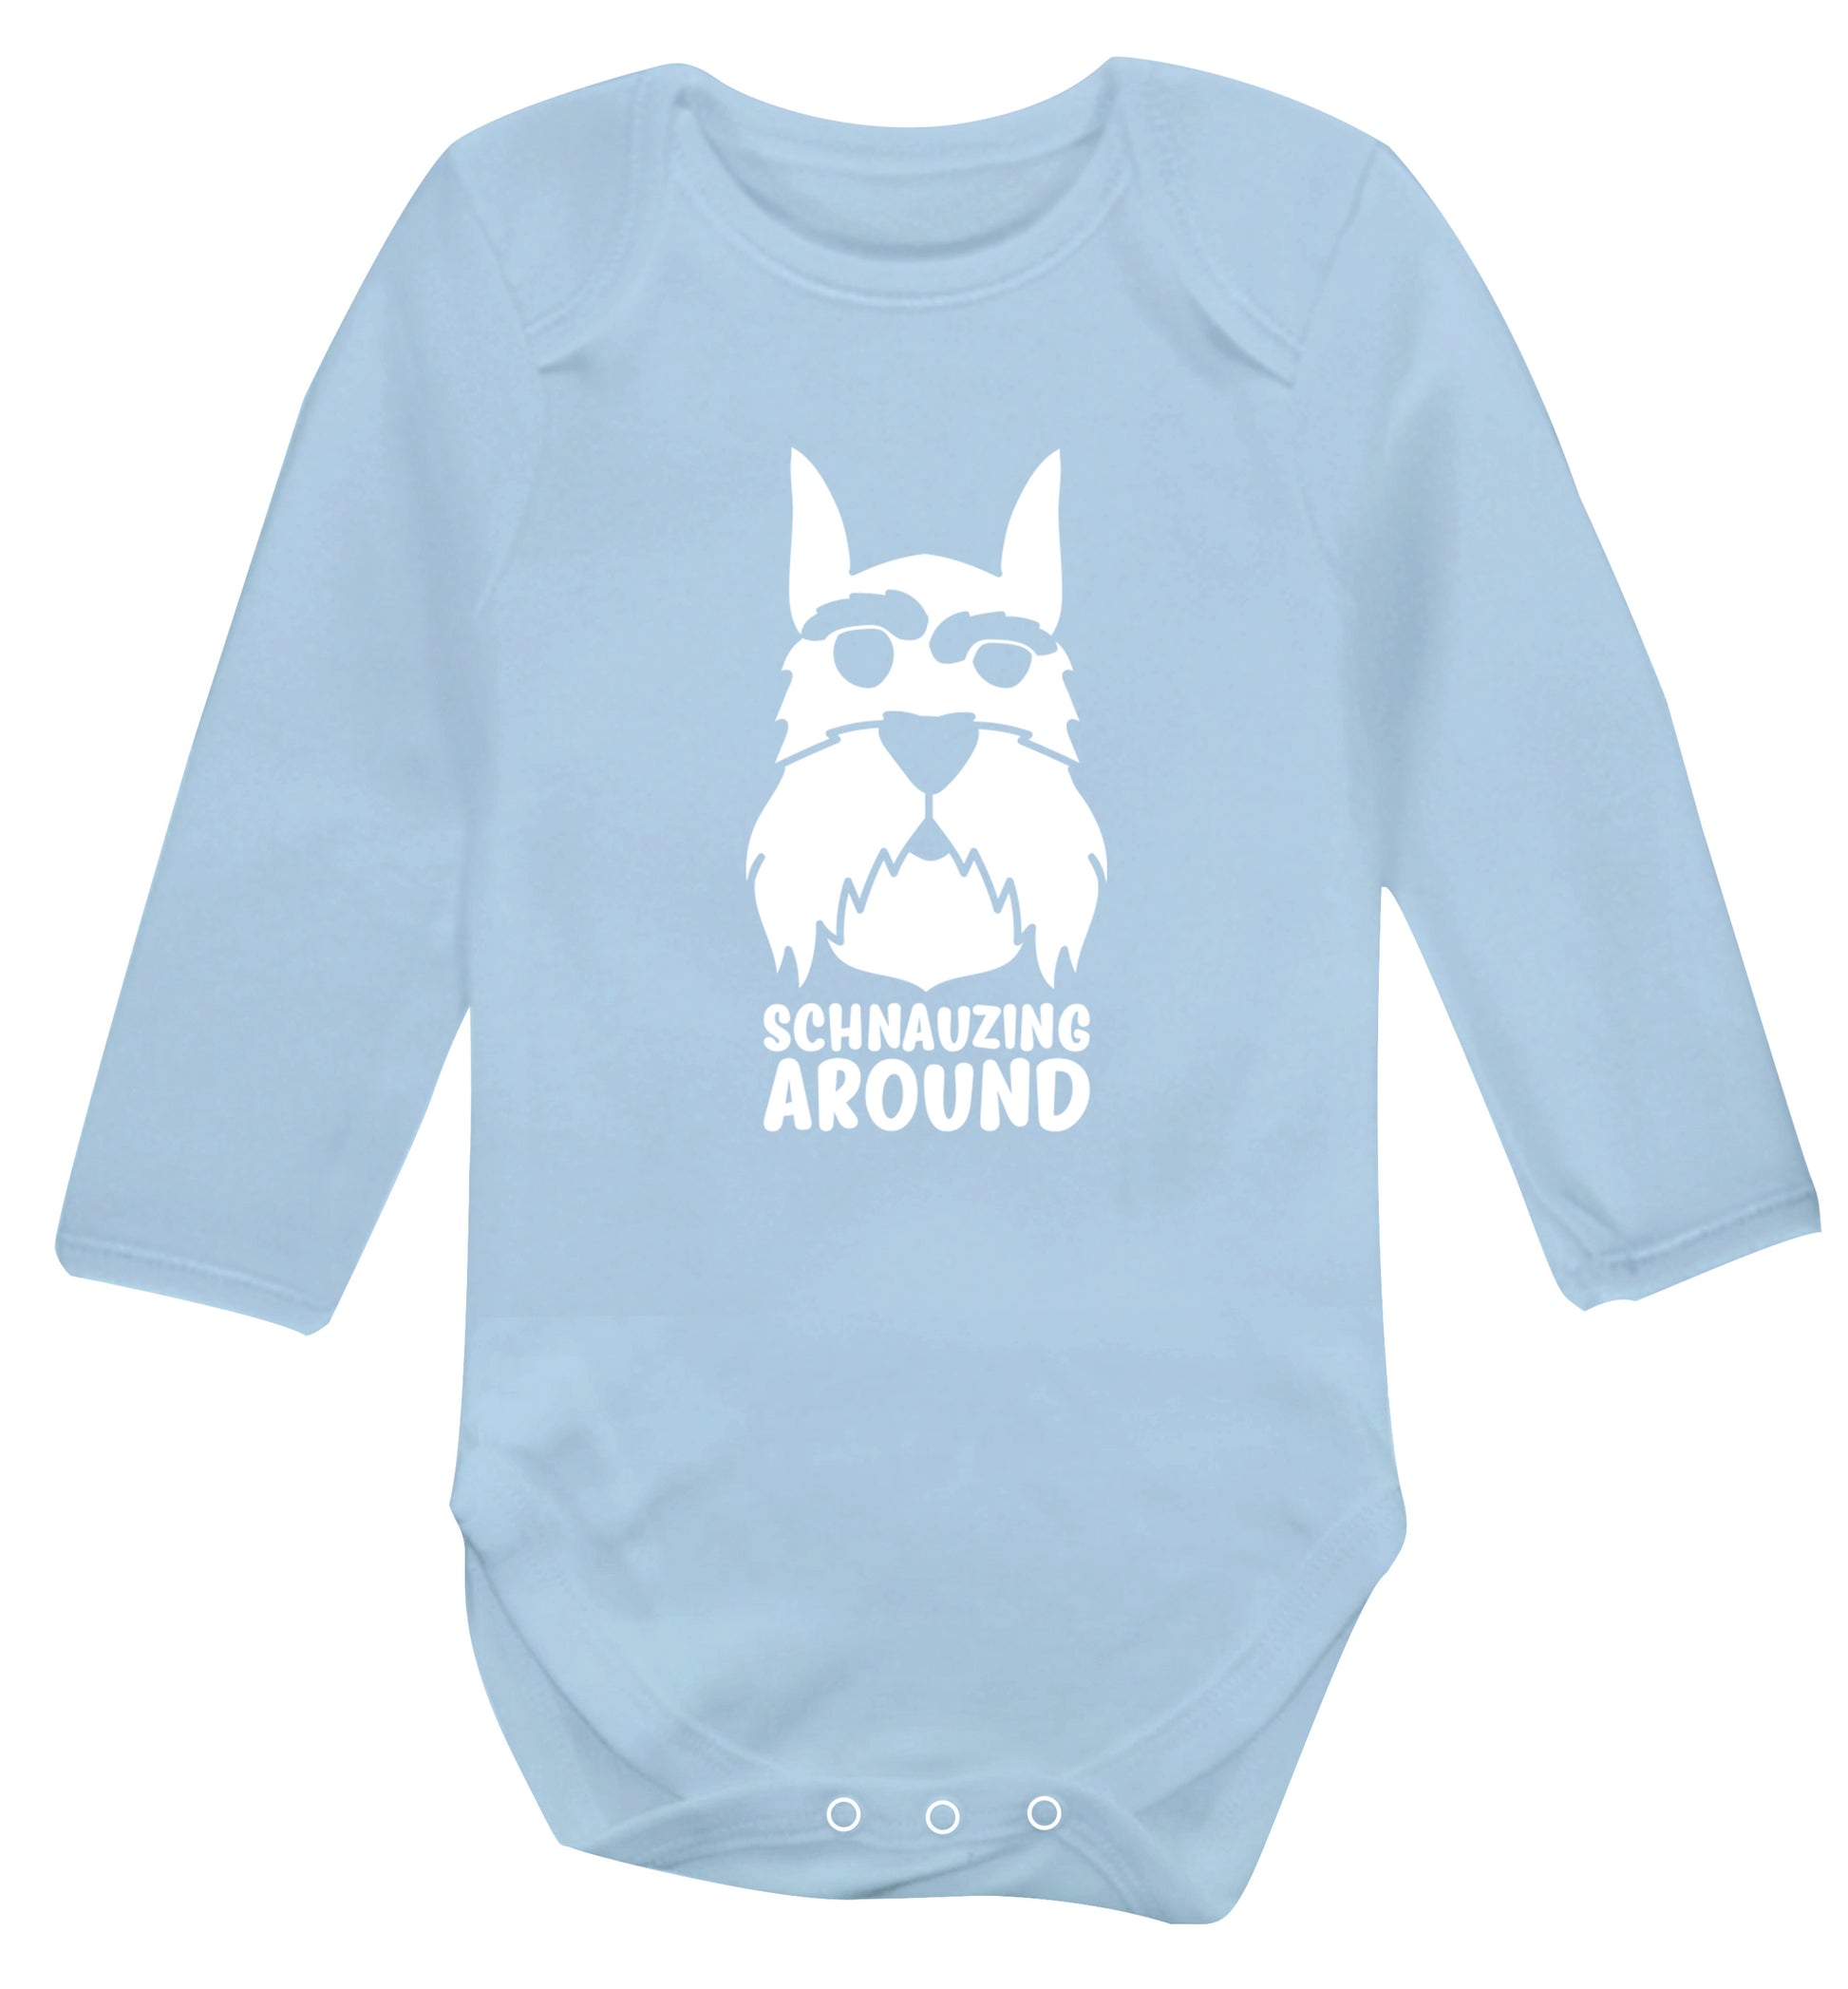 Schnauzing Around Baby Vest long sleeved pale blue 6-12 months